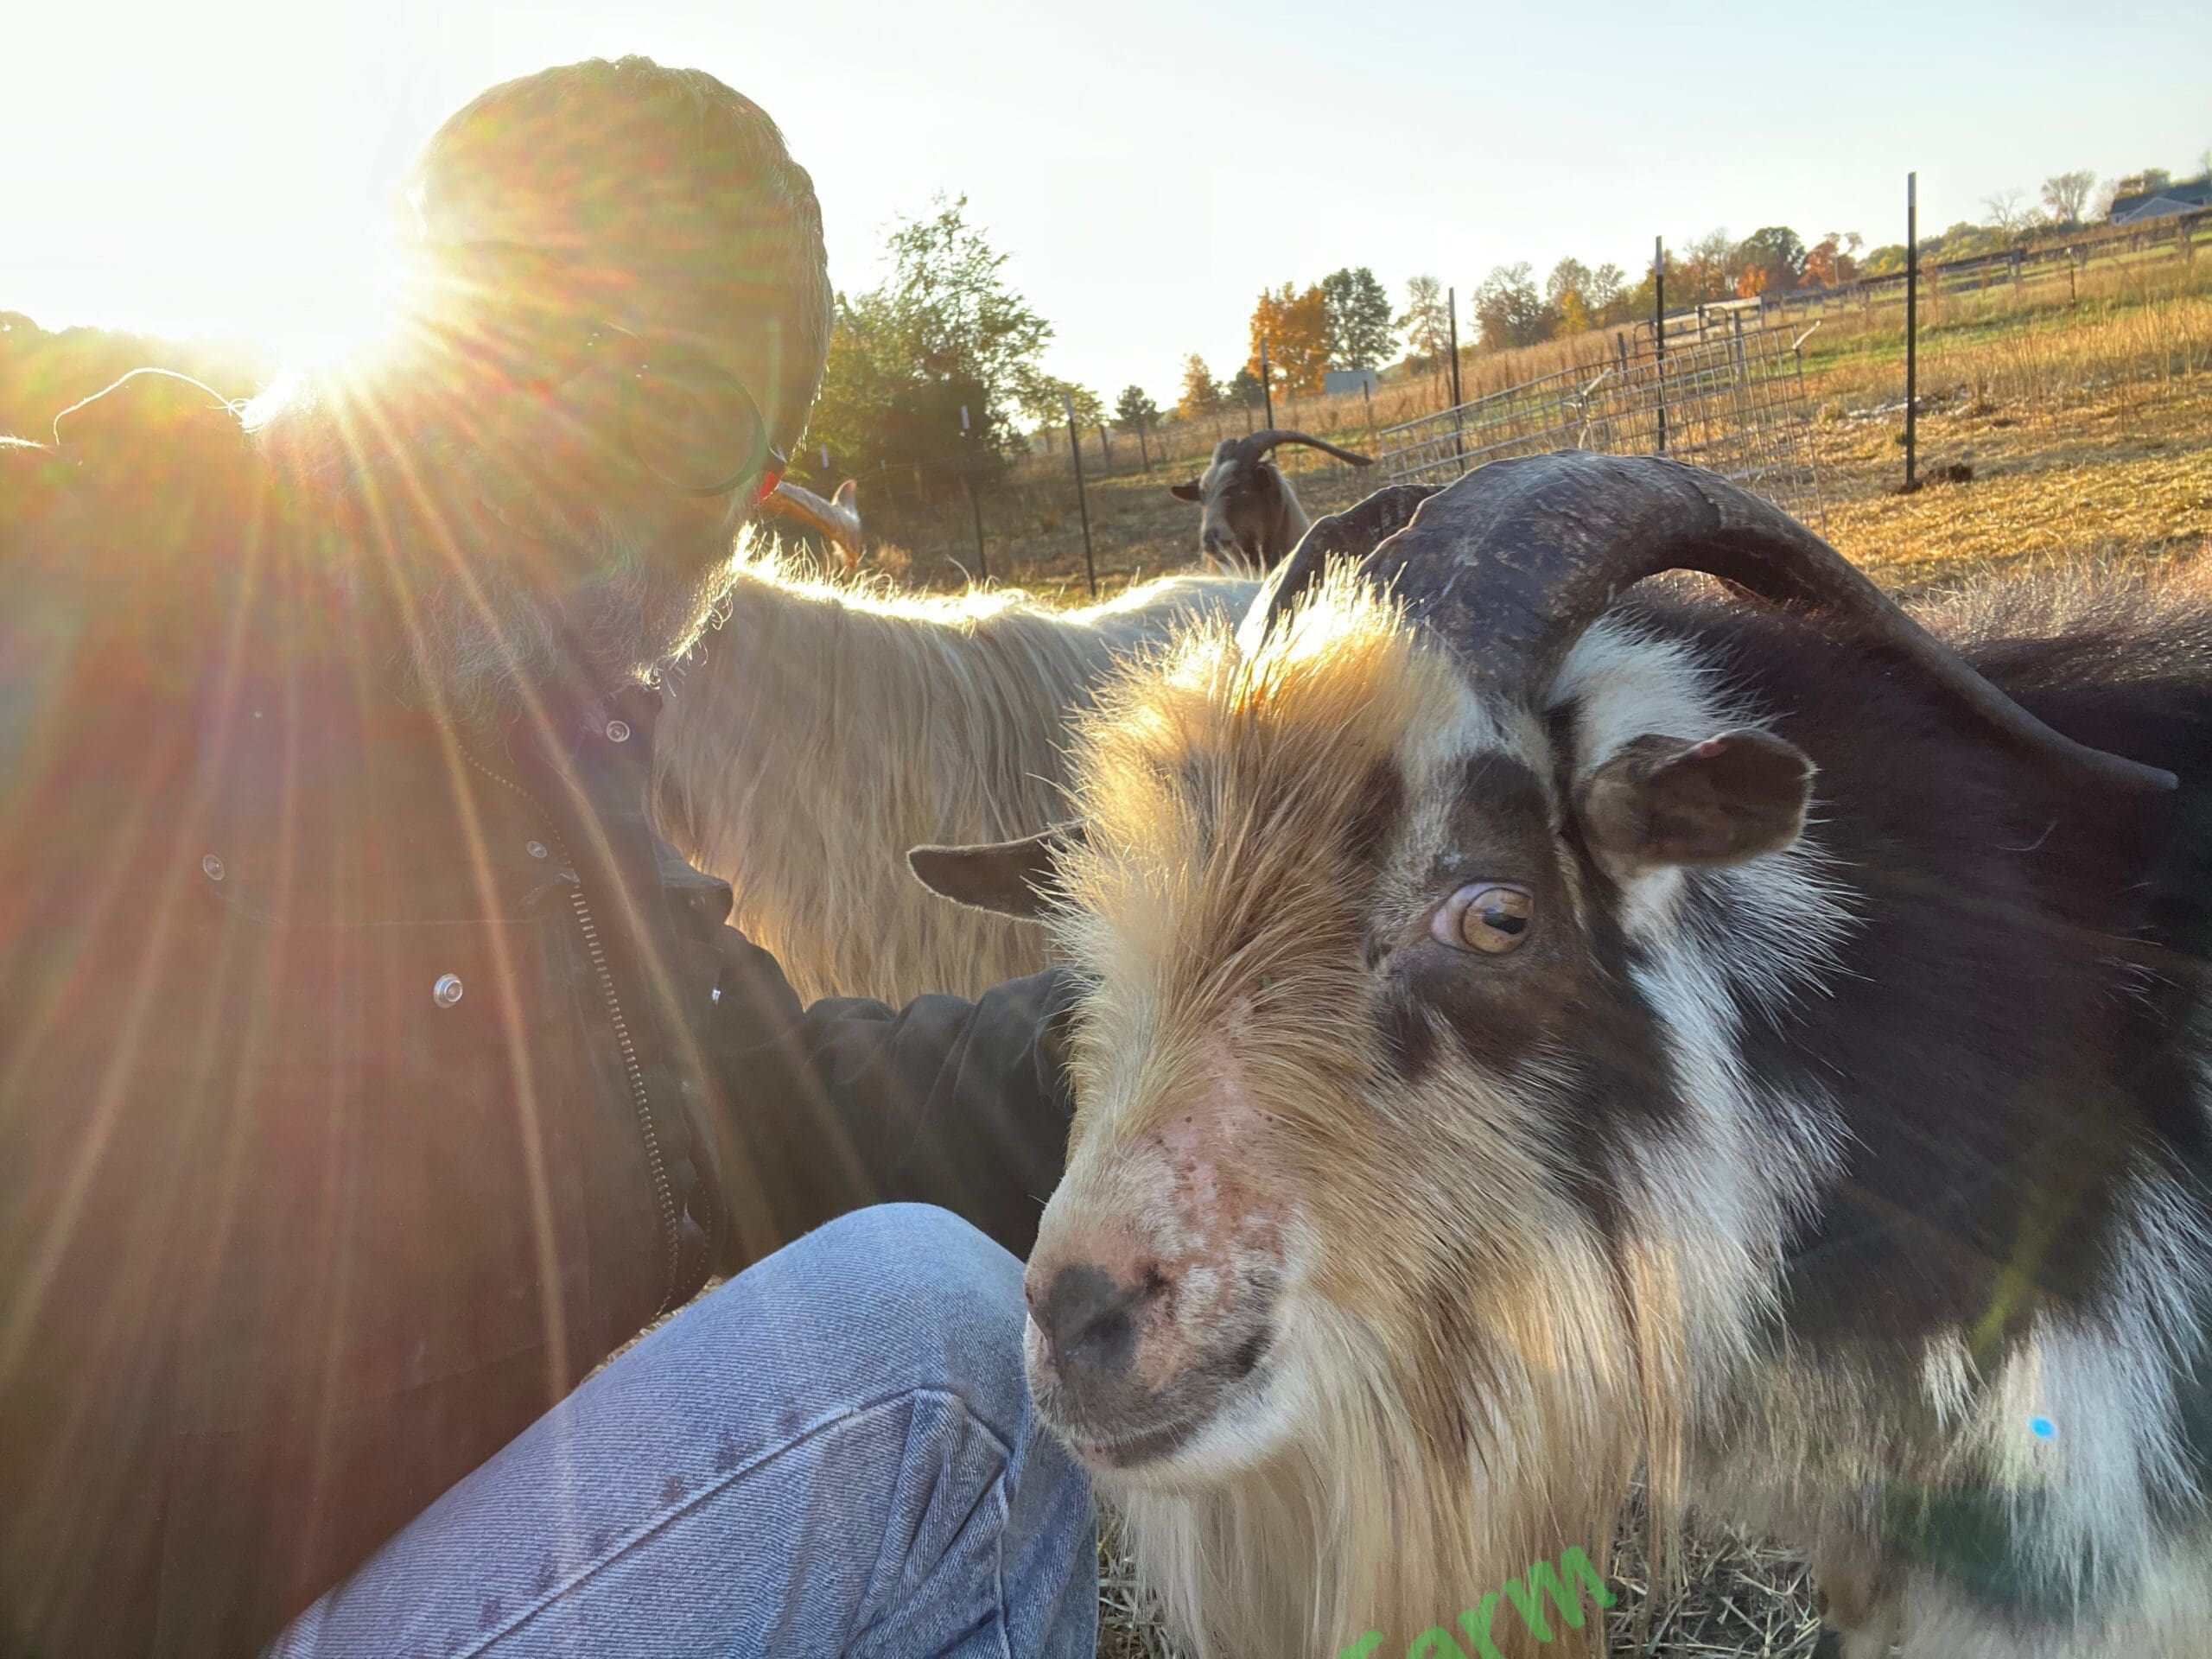 Goat and man taking a selfie.